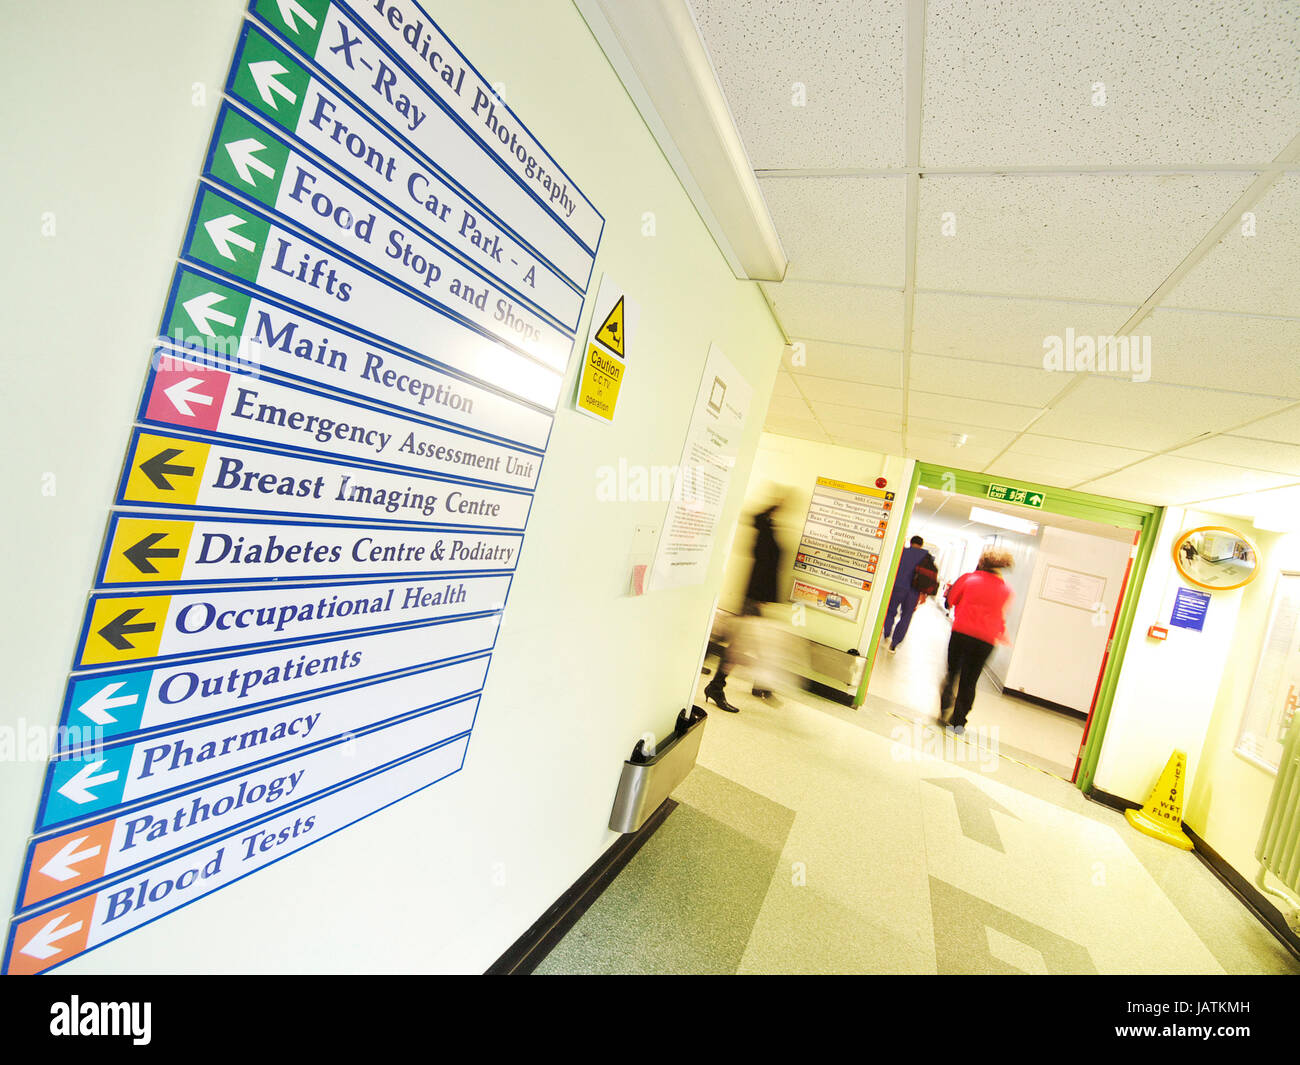 NHS Hospital IN the UK, Signage with busy hospital corridors looking empty and showing onto the ward and outpatient departments Stock Photo